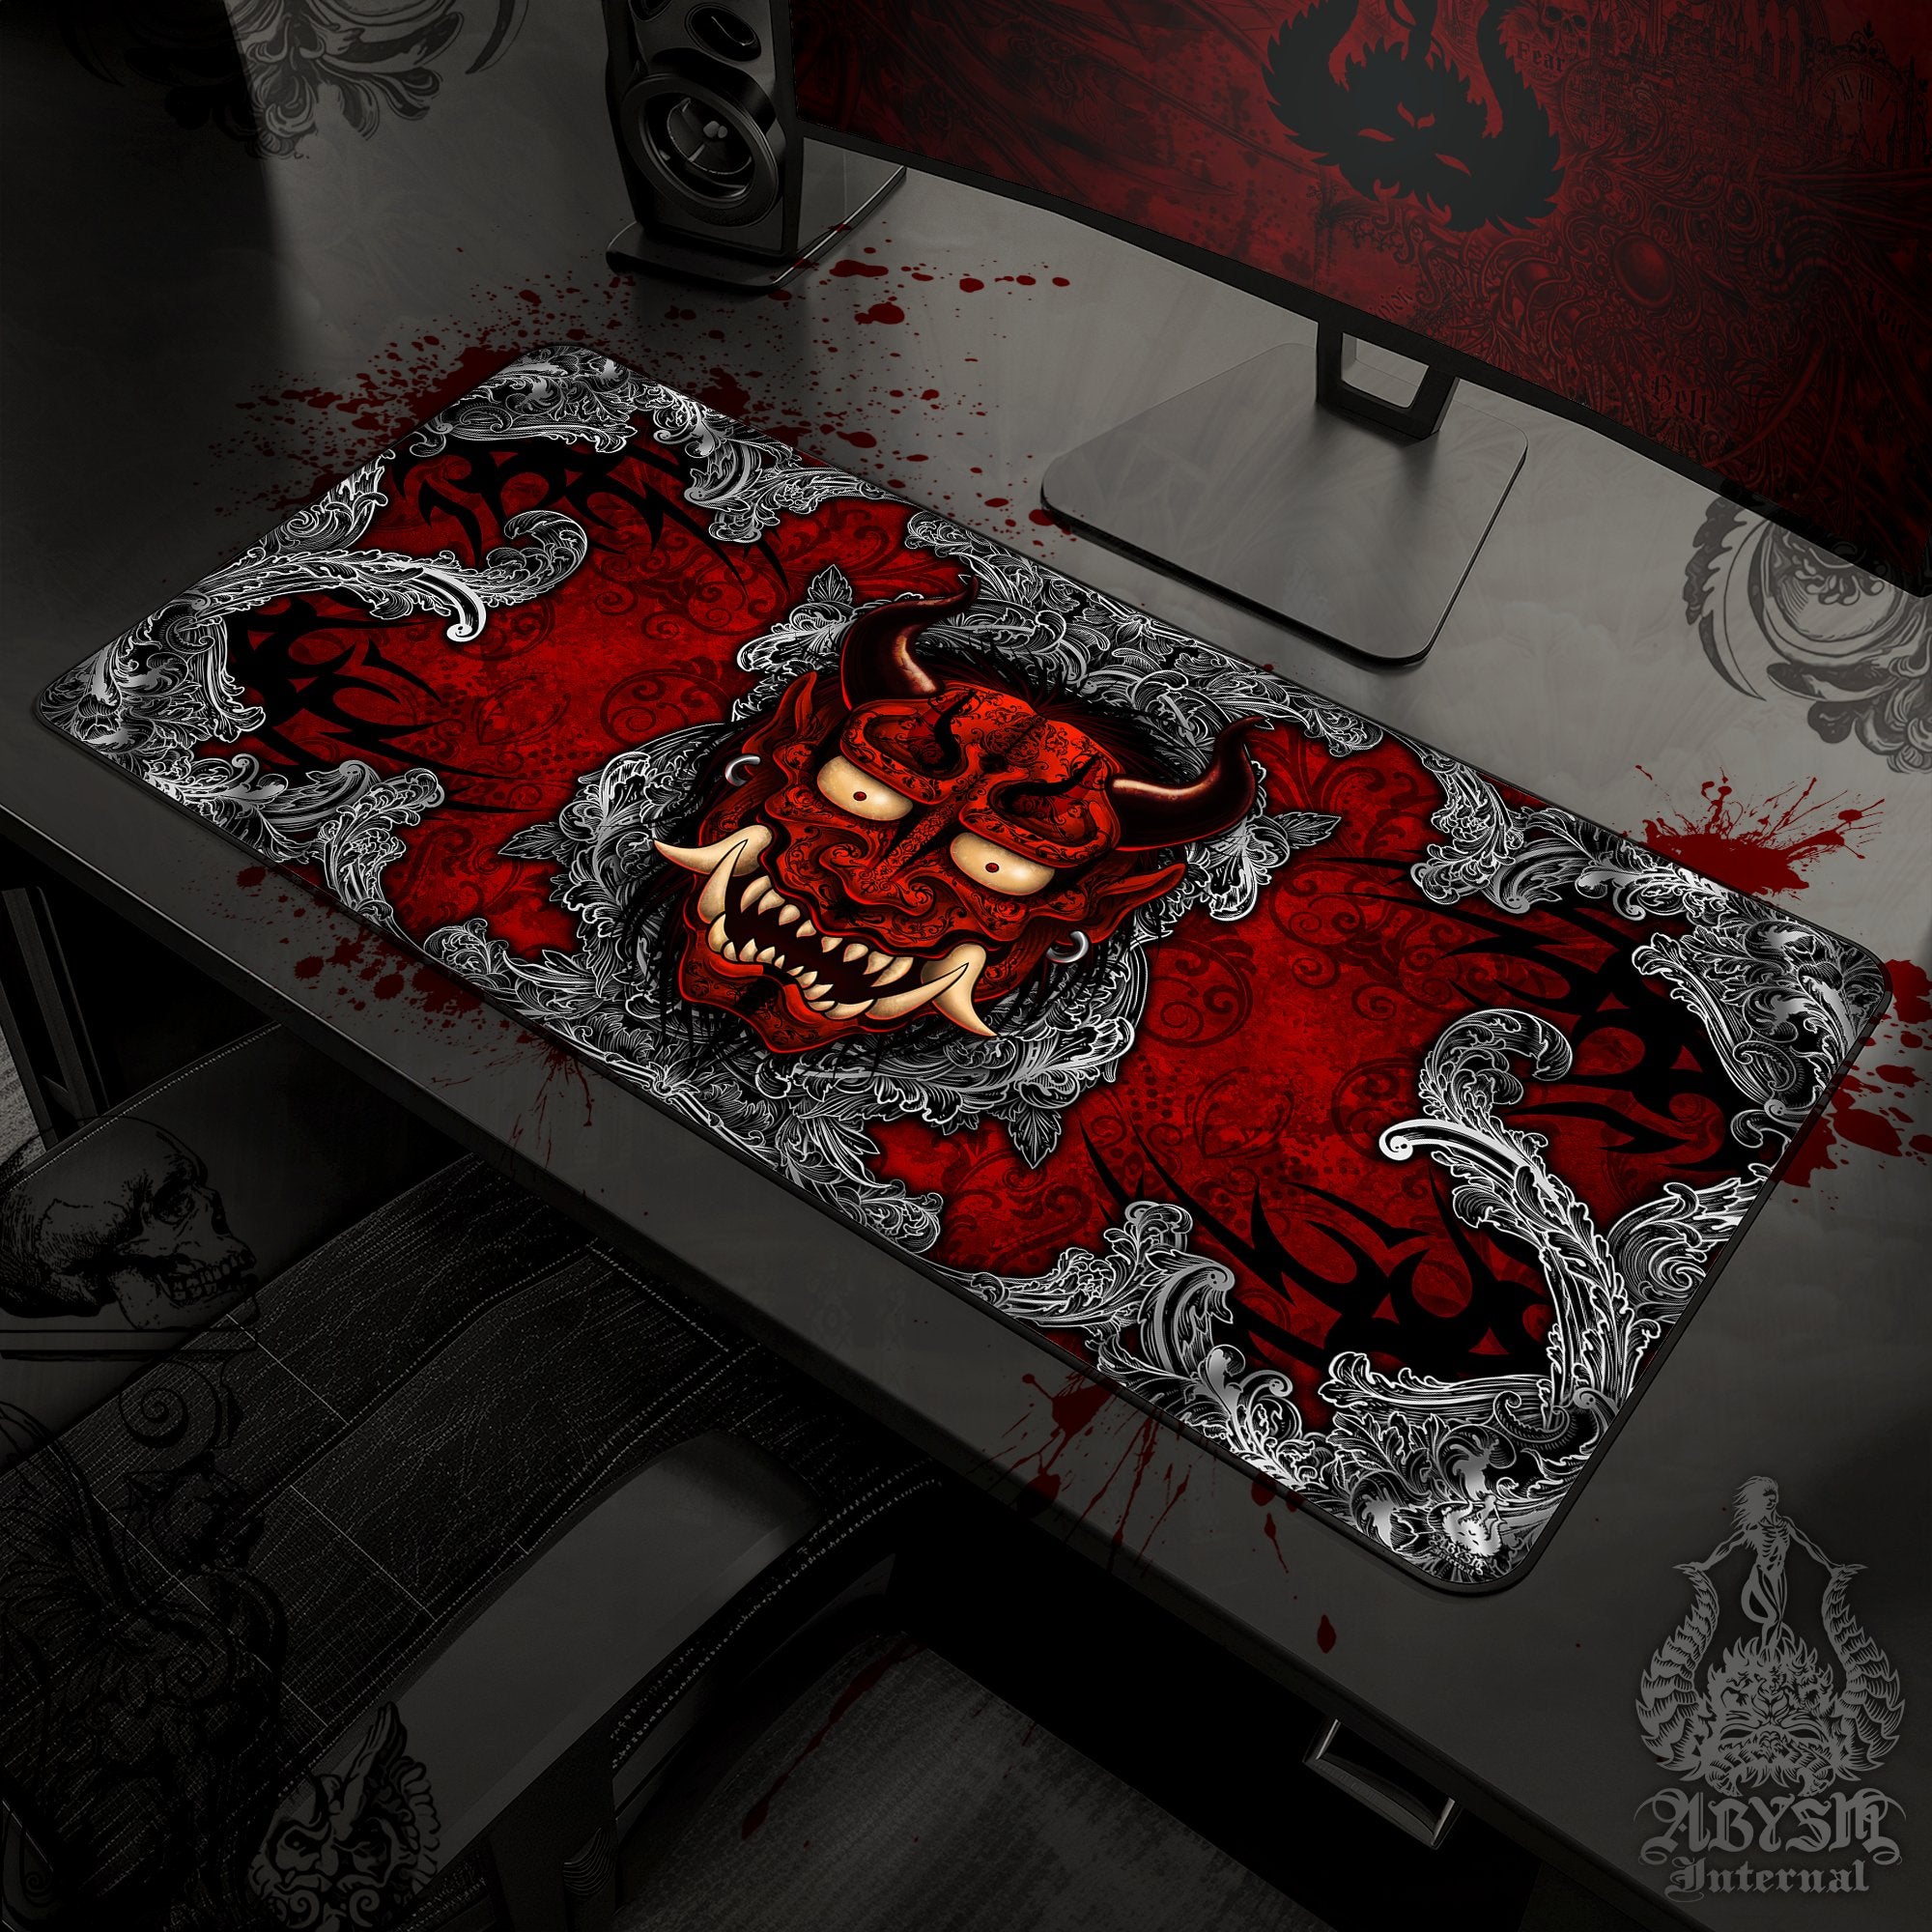 Japanese Demon Gaming Desk Mat, Oni Mouse Pad, Gamer Table Protector Cover, Bloody Gothic Workpad, Anime Yokai Art Print - Red, Black, 2 Colors - Abysm Internal